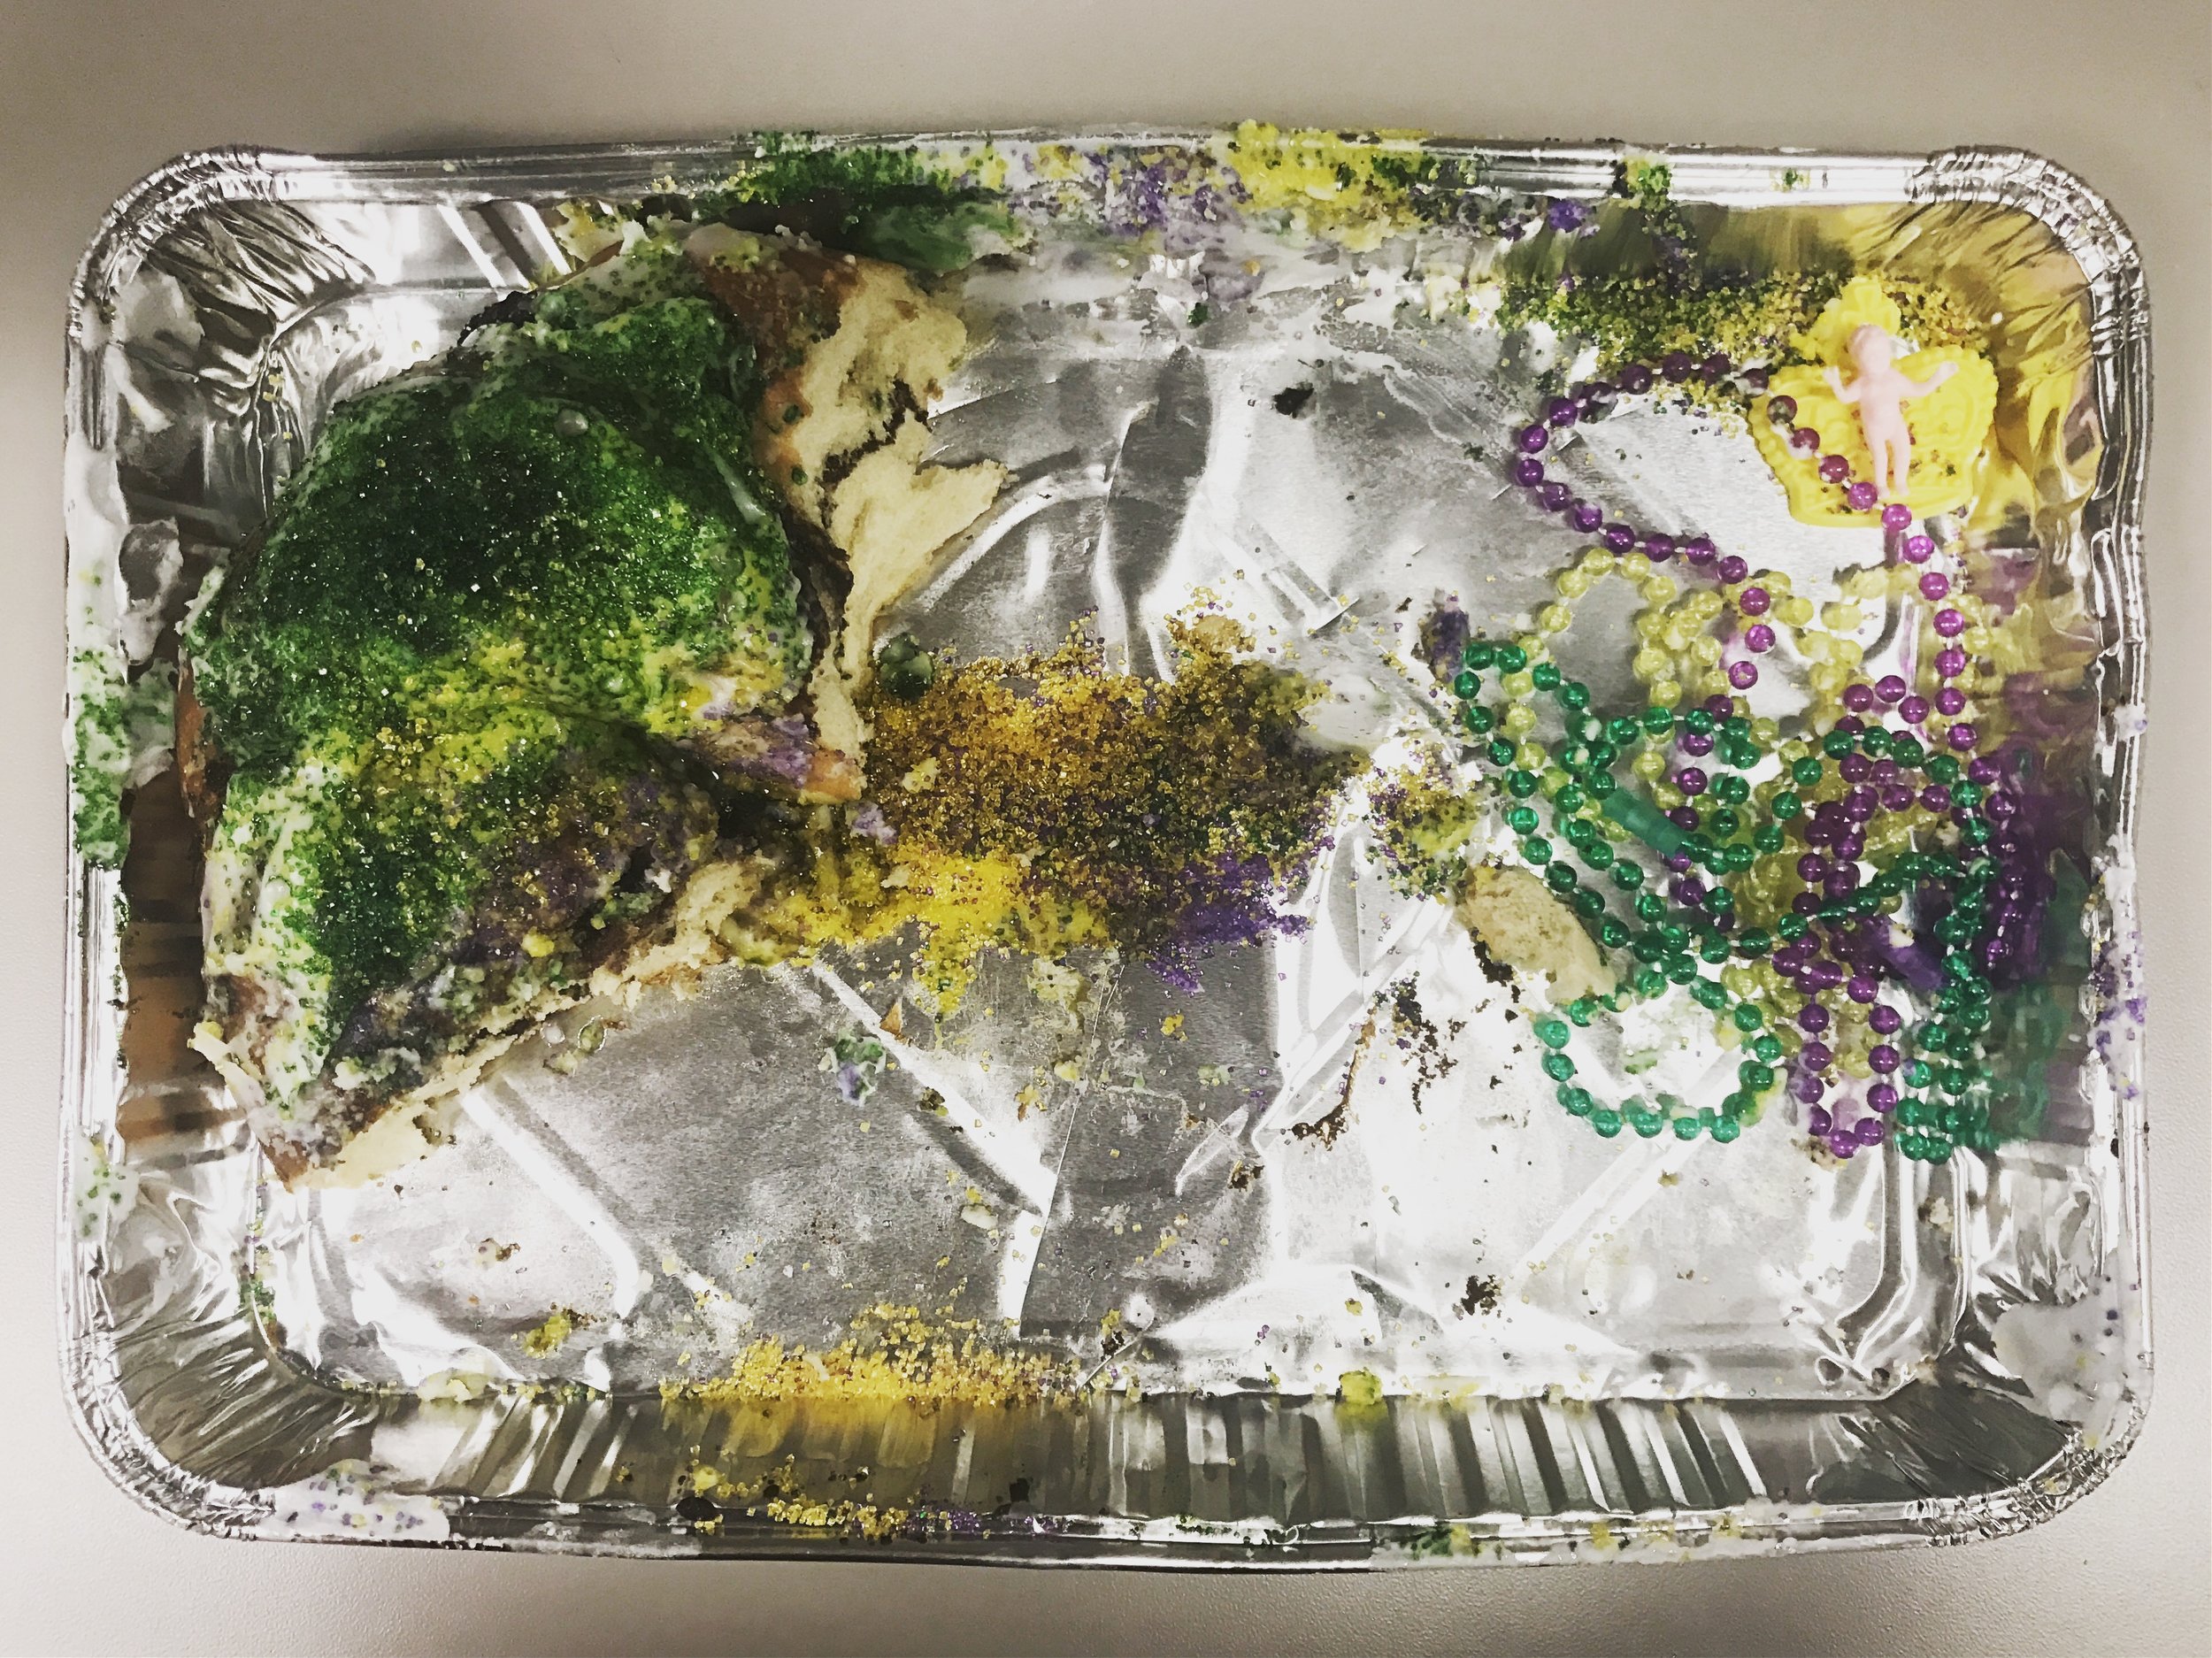  Day after King Cake 